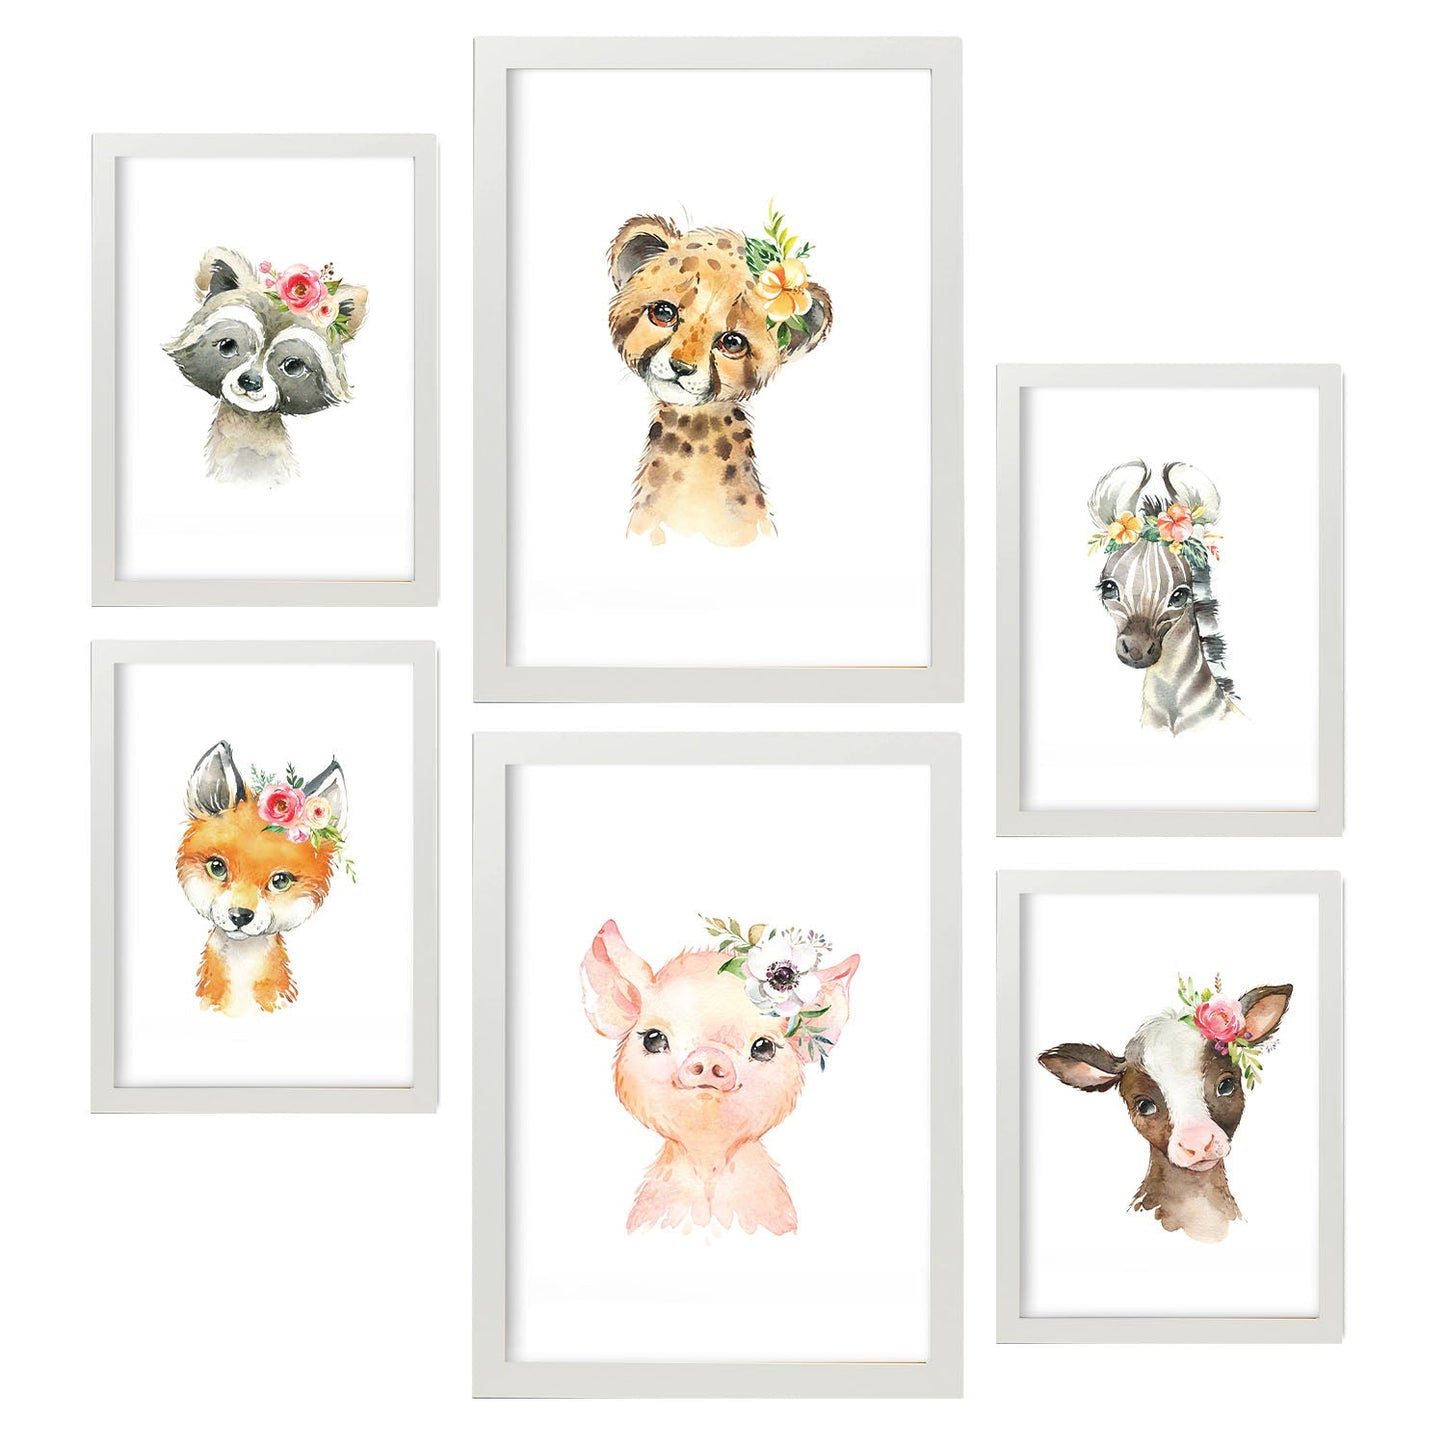 Nacnic animales flores. Aesthetic Wall Art Prints for Bedroom or Living Room Design.